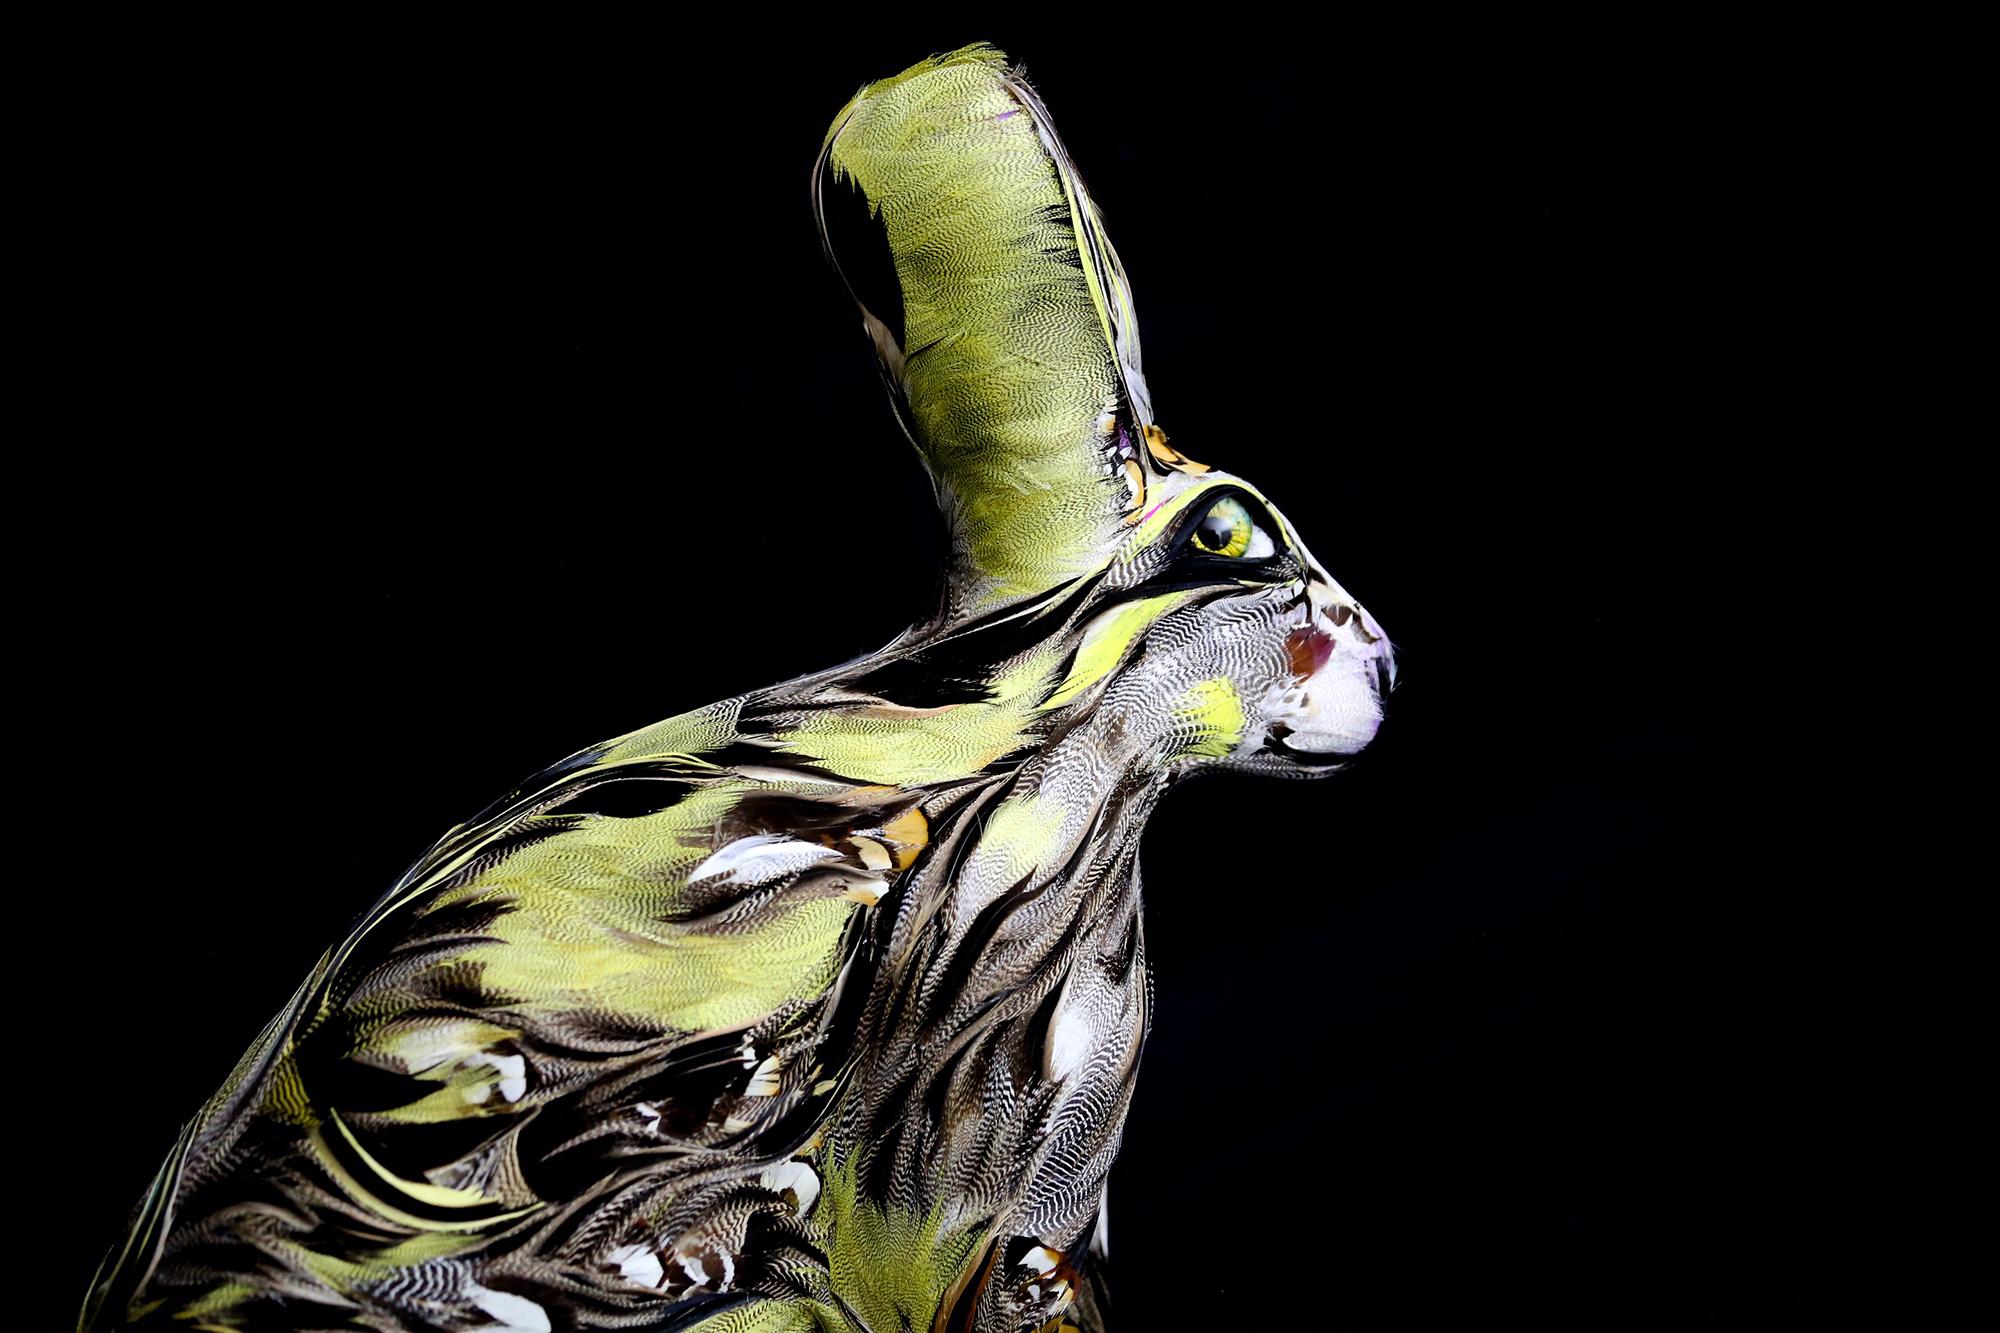 Leonard, Hare, feathers on resin, animal sculpture Laurence Le Constant 2